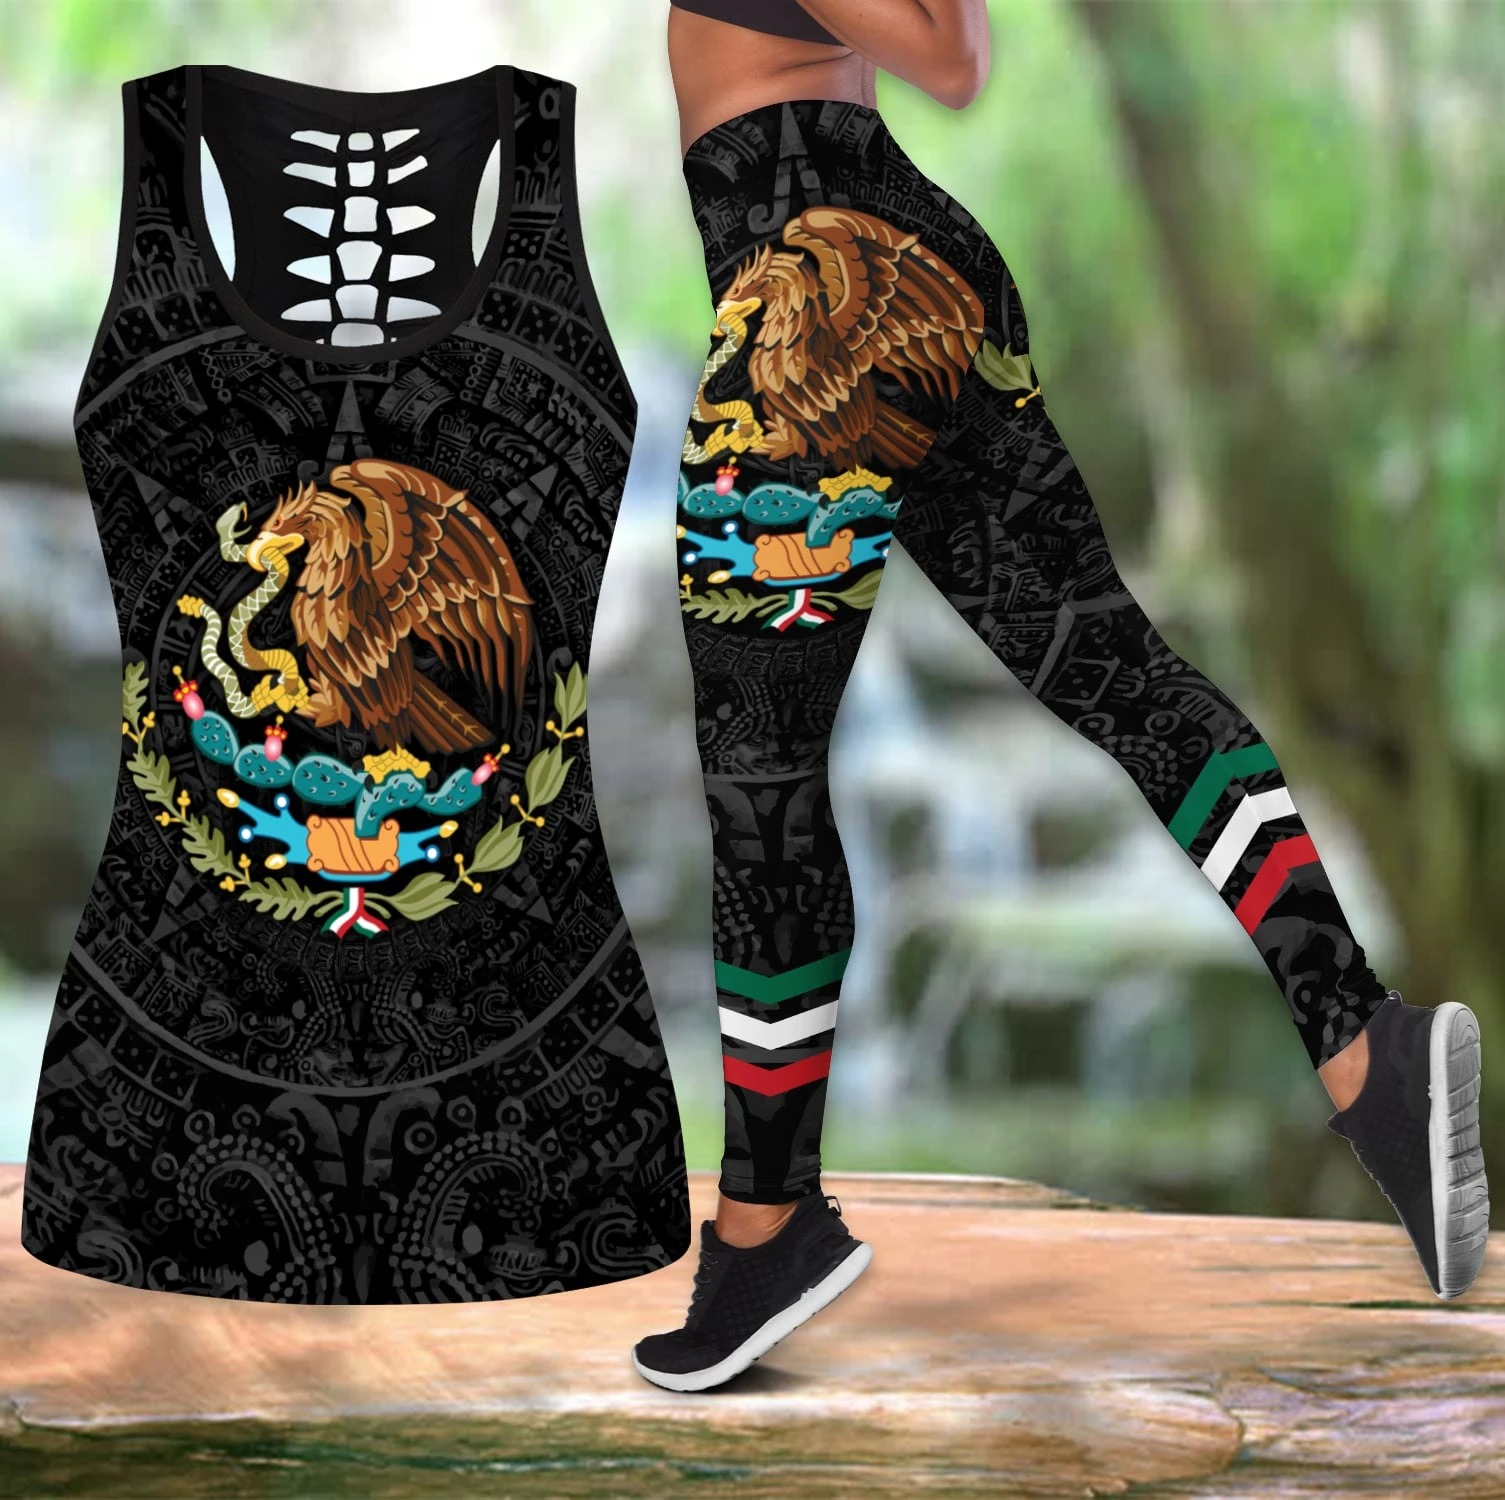 Aztec Mexico hollow tank top and legging – Hothot 130720